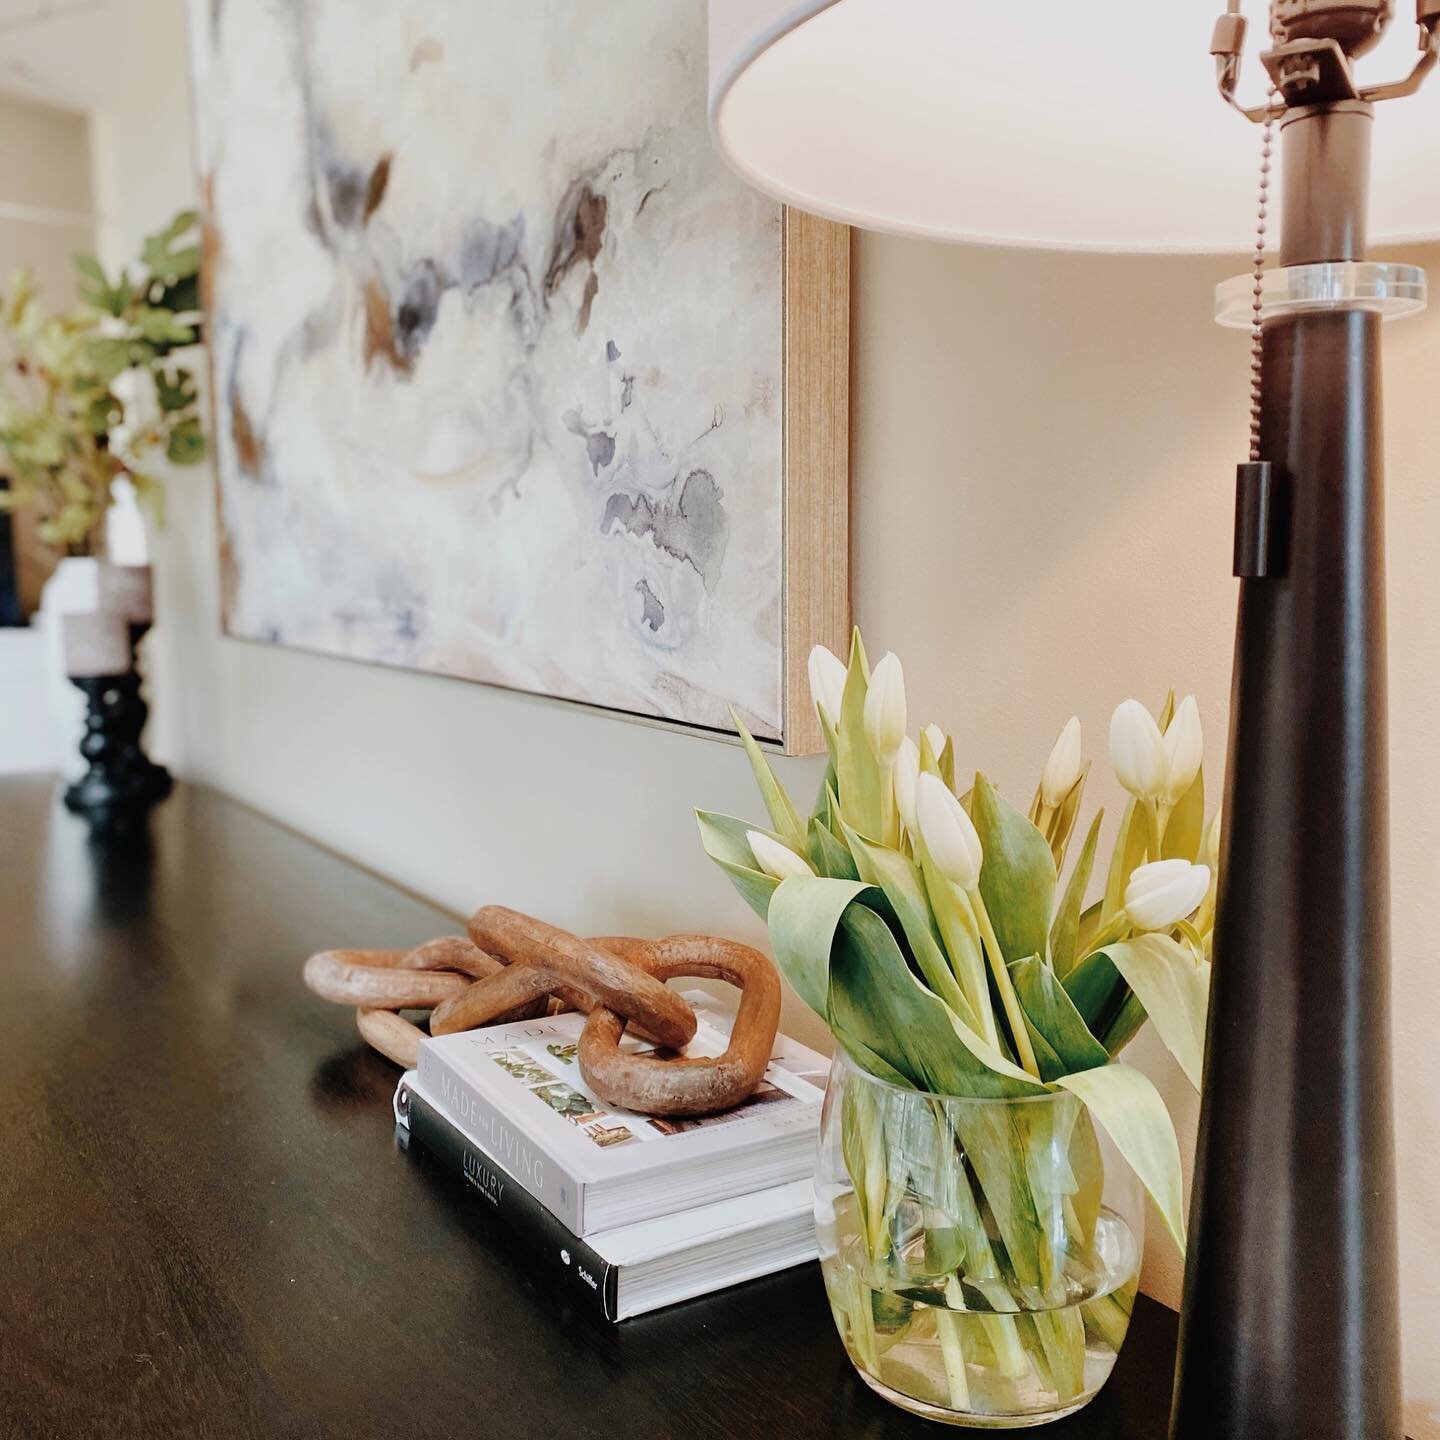 &ldquo;Simplicity is the ultimate sophistication&rdquo; 

#staging #staginngworks #staginghomes #stagingsells #stagingcompany #womanownedsmallbusiness #cwdecorating #consoletable #diningroom #diningroomdecor #tulips #detailsmatter #sophisticationatit